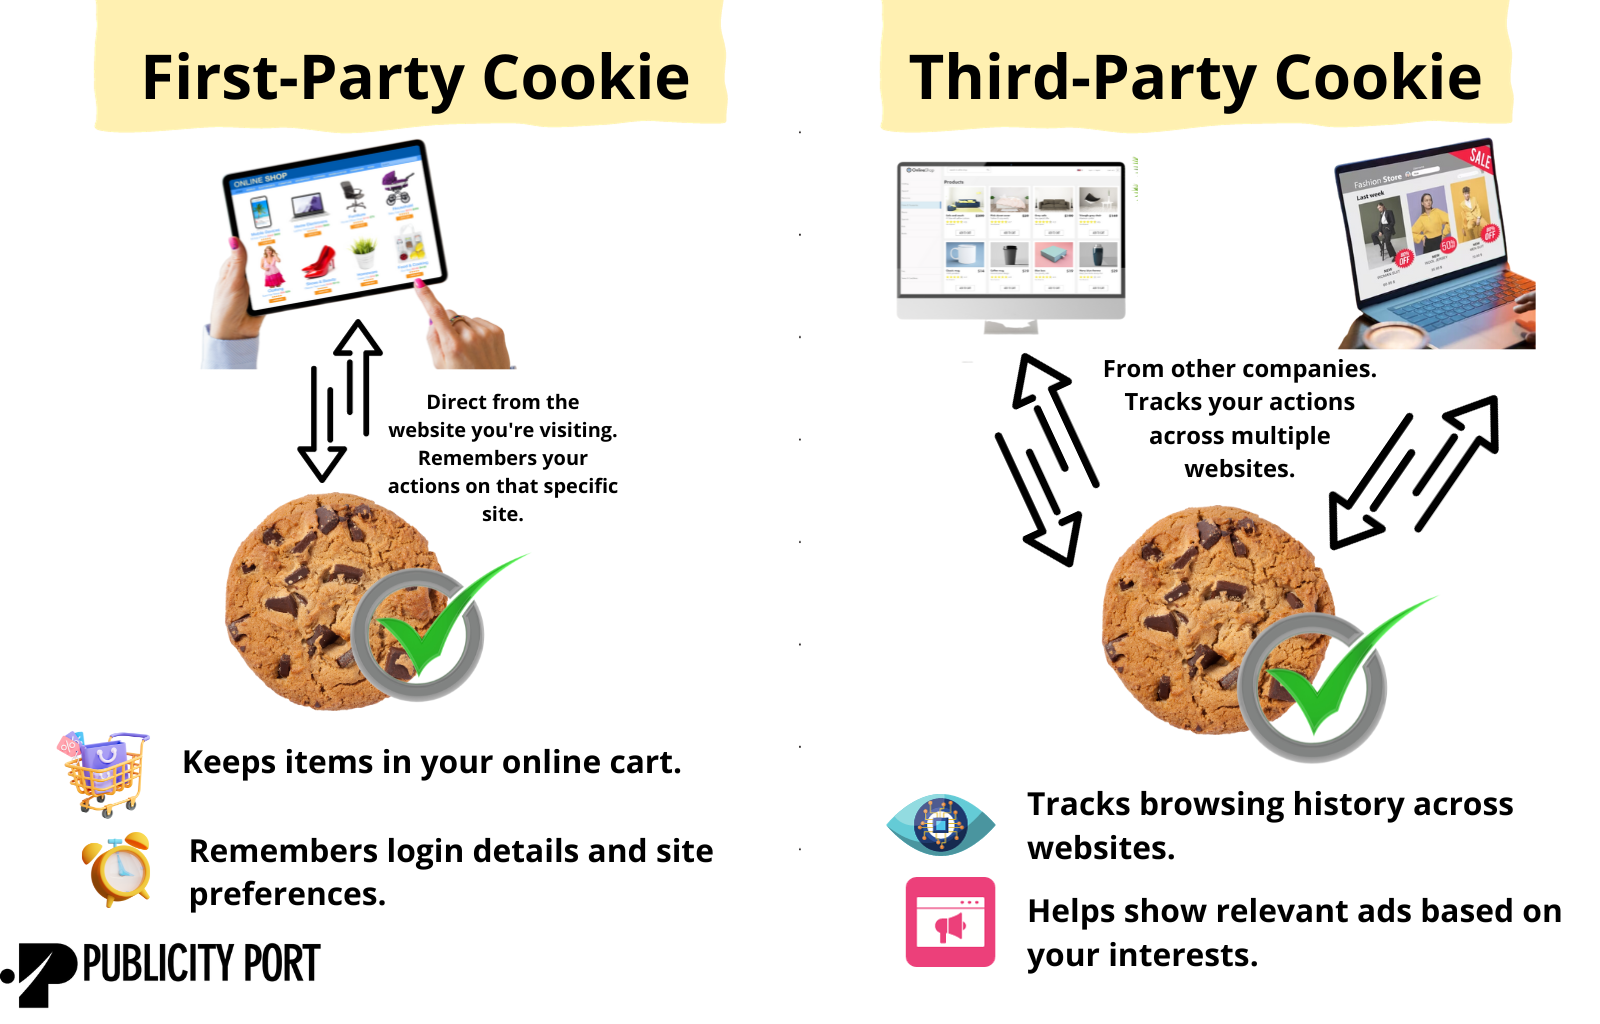 What Will Replace Third-Party Cookies?